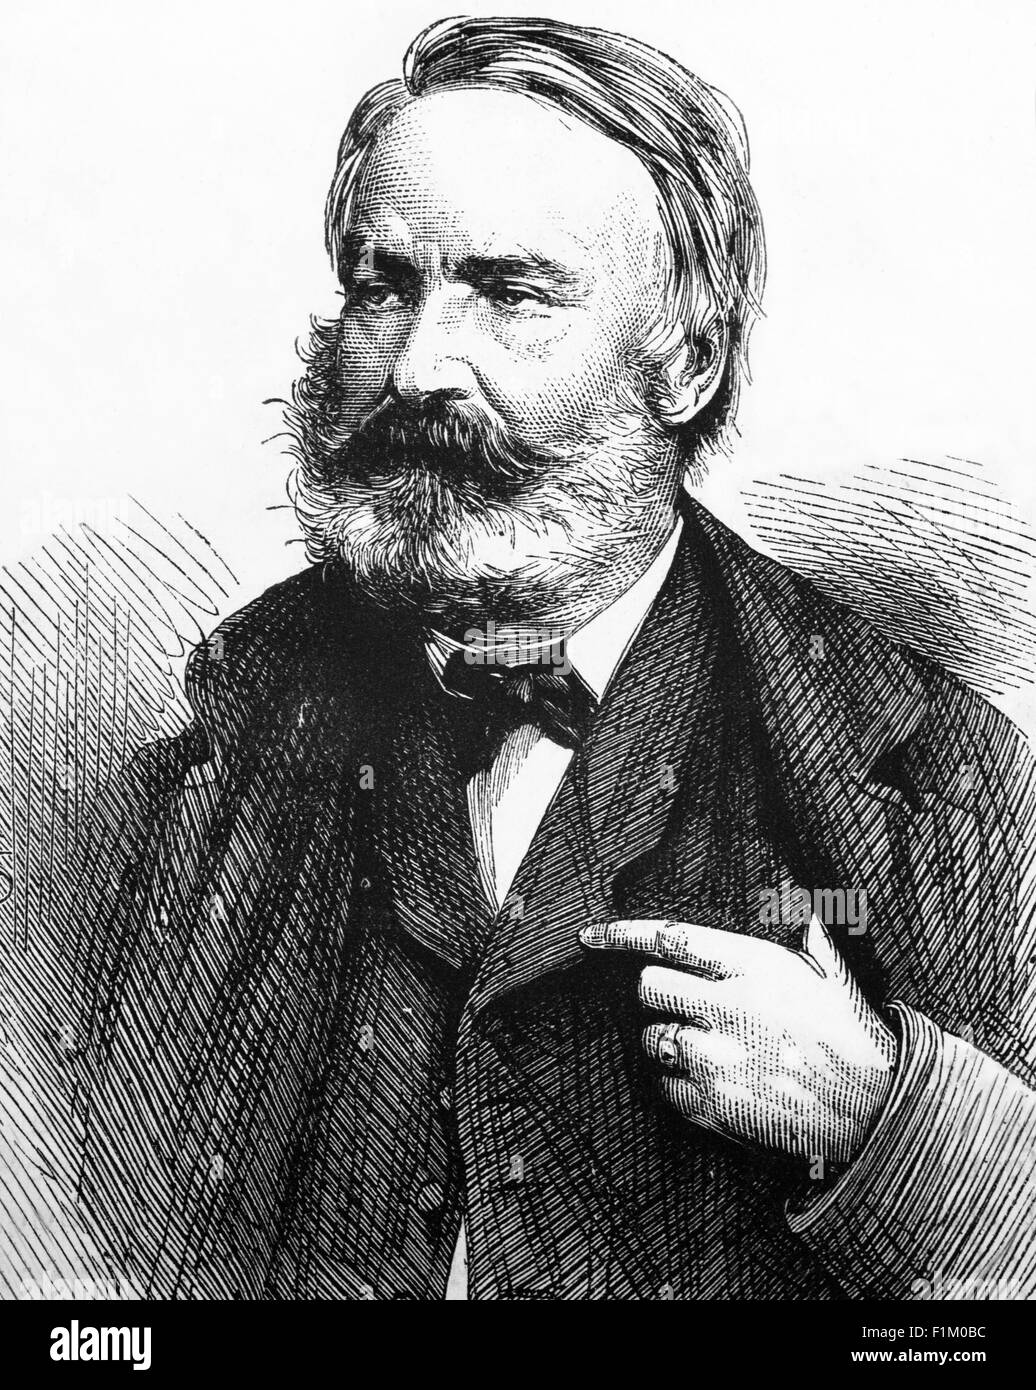 A portrait of Victor-Marie Hugo (1802-1885), French poet, novelist, and dramatist of the Romantic movement. Considered to be one of the greatest and best-known French writers, his most famous works are the novels Les Misérables in 1862, and The Hunchback of Notre-Dame in 1831. Stock Photo